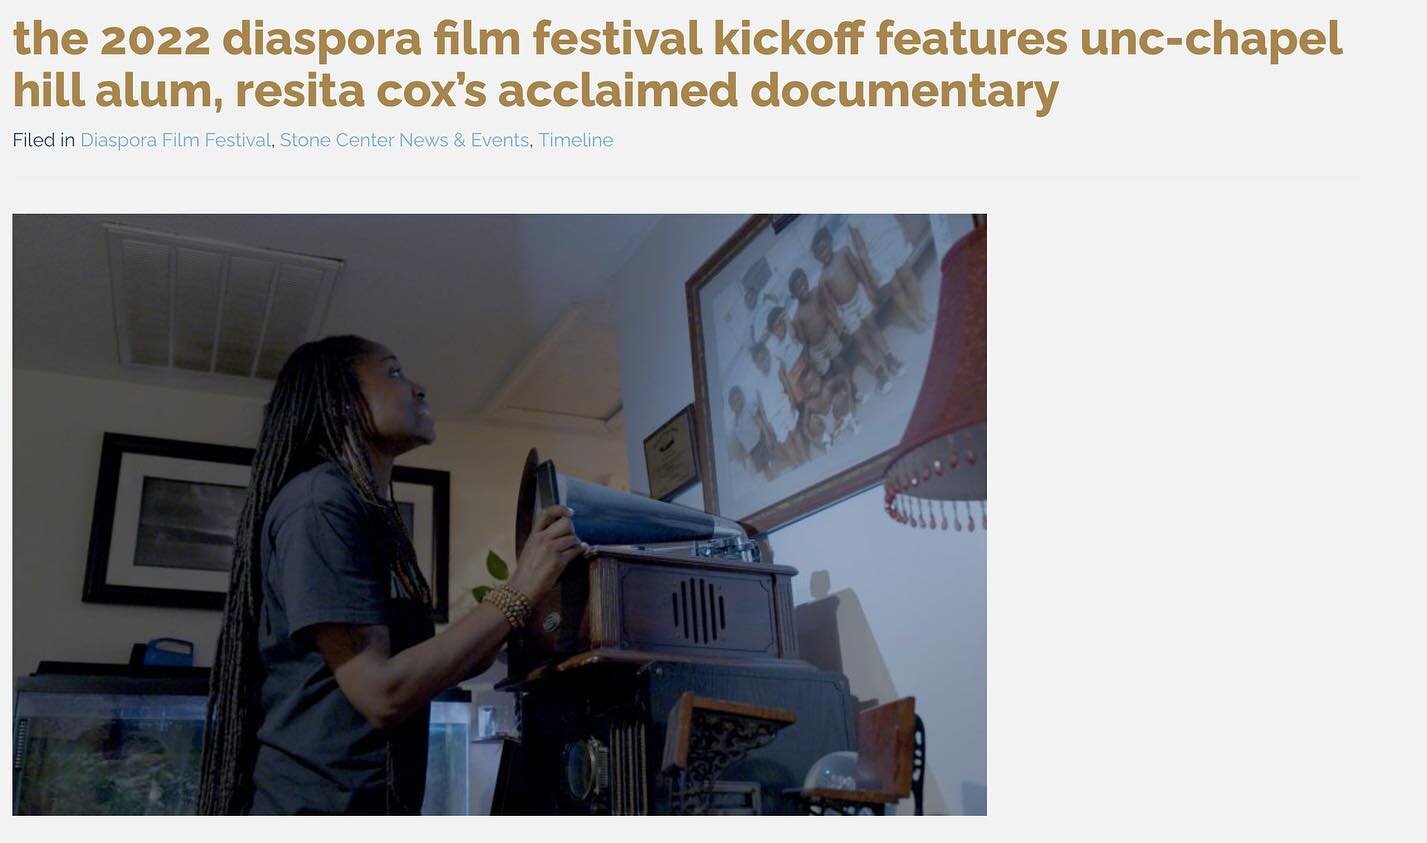 Excited to share that @freedomhilldoc will be screening at Diaspora film festival!

Learn more and get tickets at the link in the bio. 📲 #DiasporaFilmFestival #FreedomHillDoc